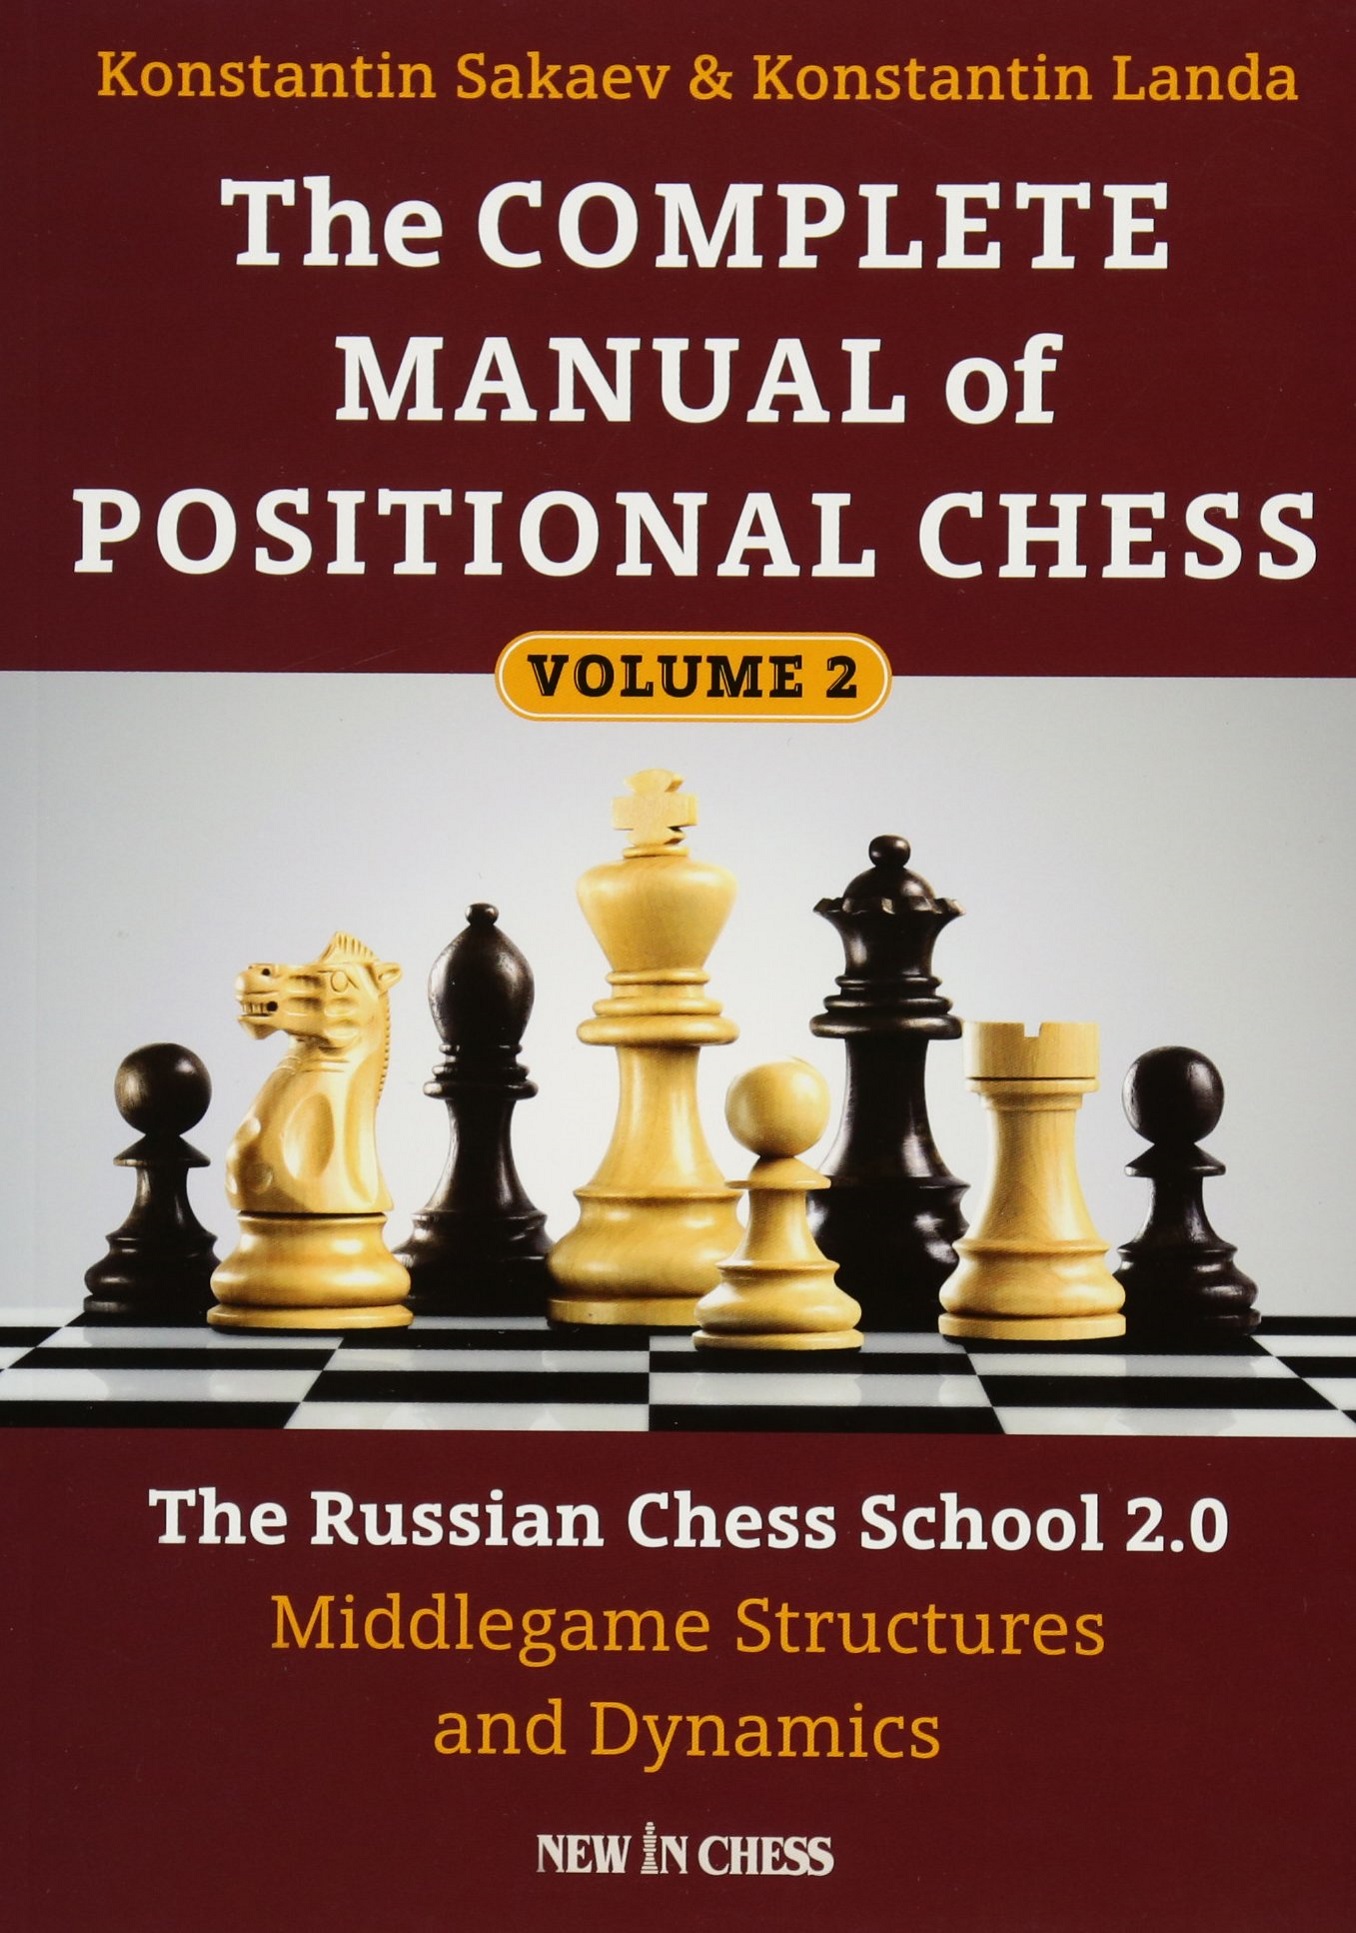 The Complete Manual of Positional Chess. Volume 2: The Russian Chess School 2.0